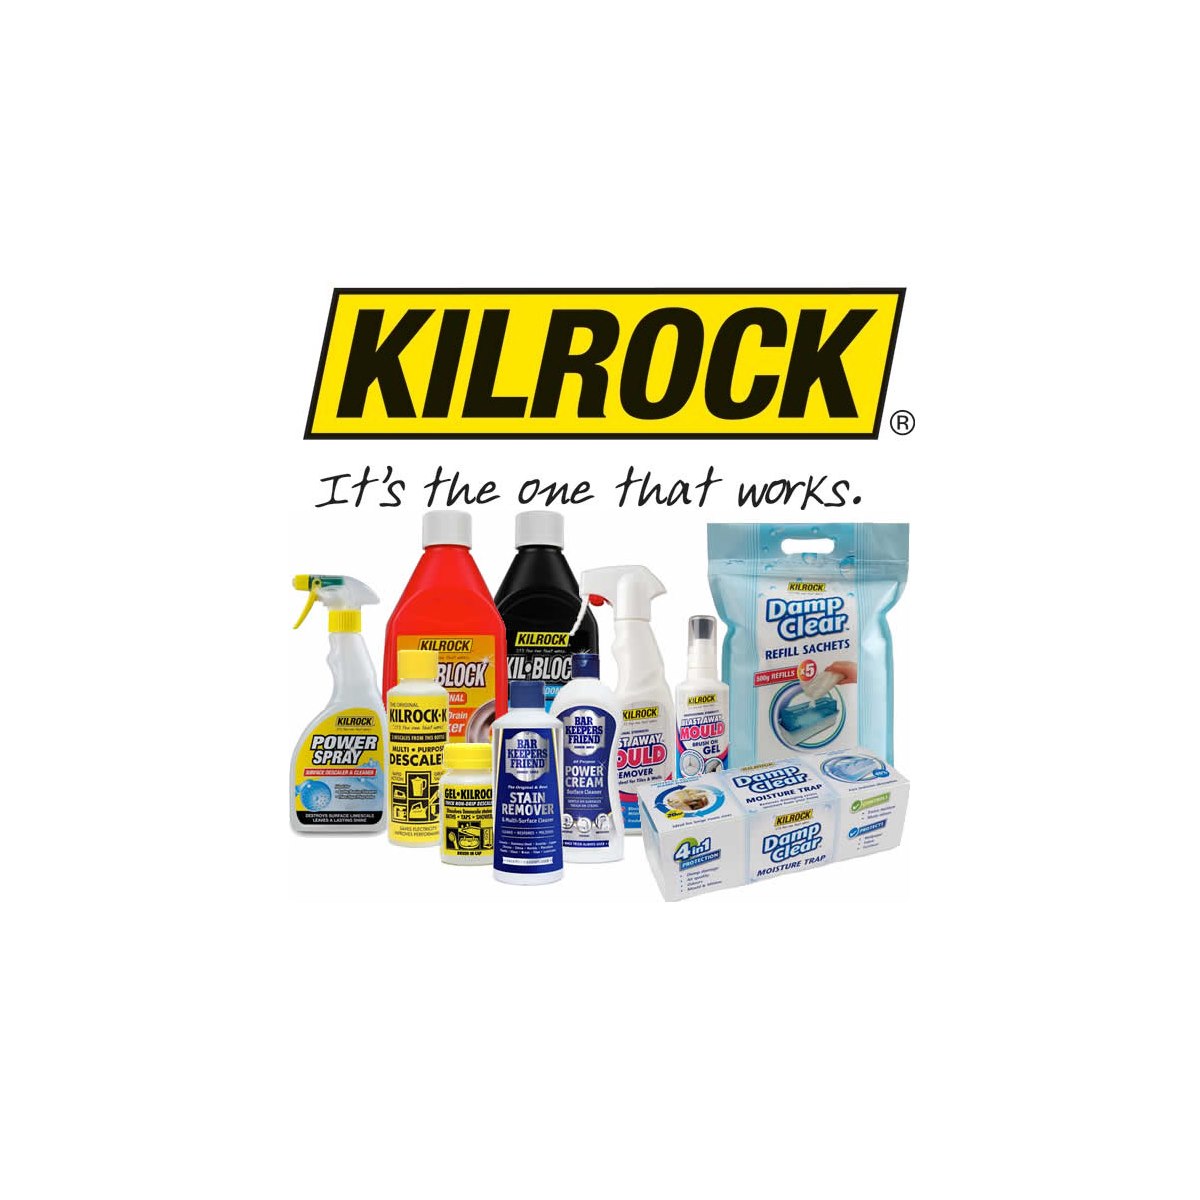 Where to Buy Kilrock Products